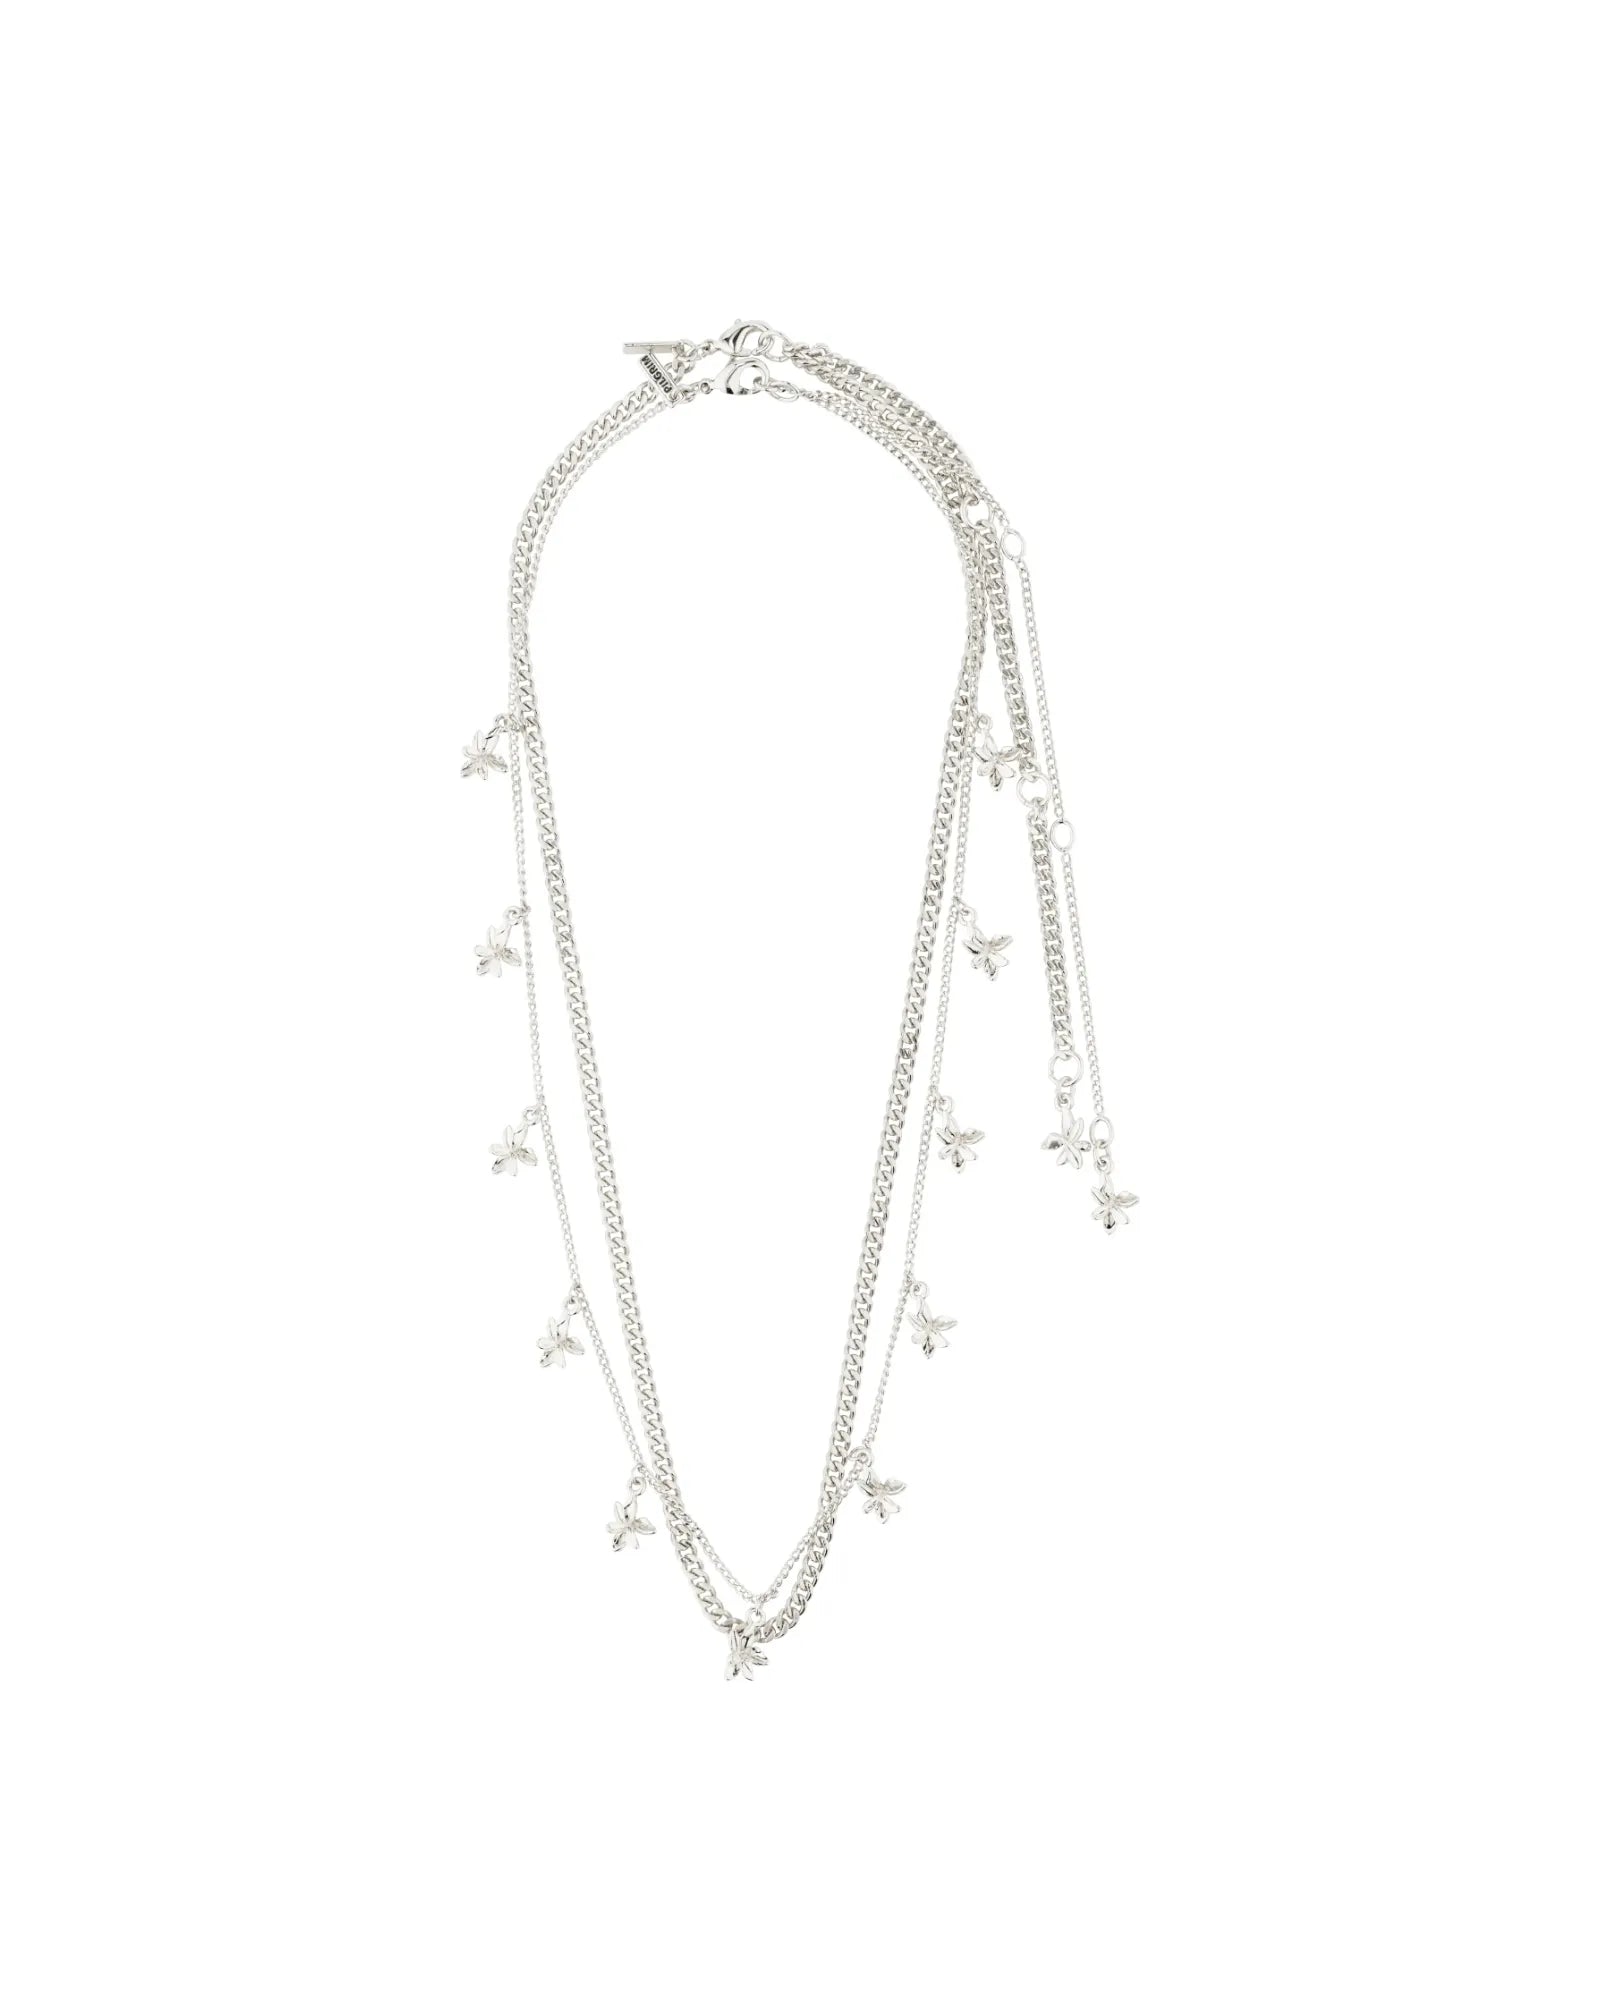 RIKO Recycled Necklace 2-in-1 - Silver Plated